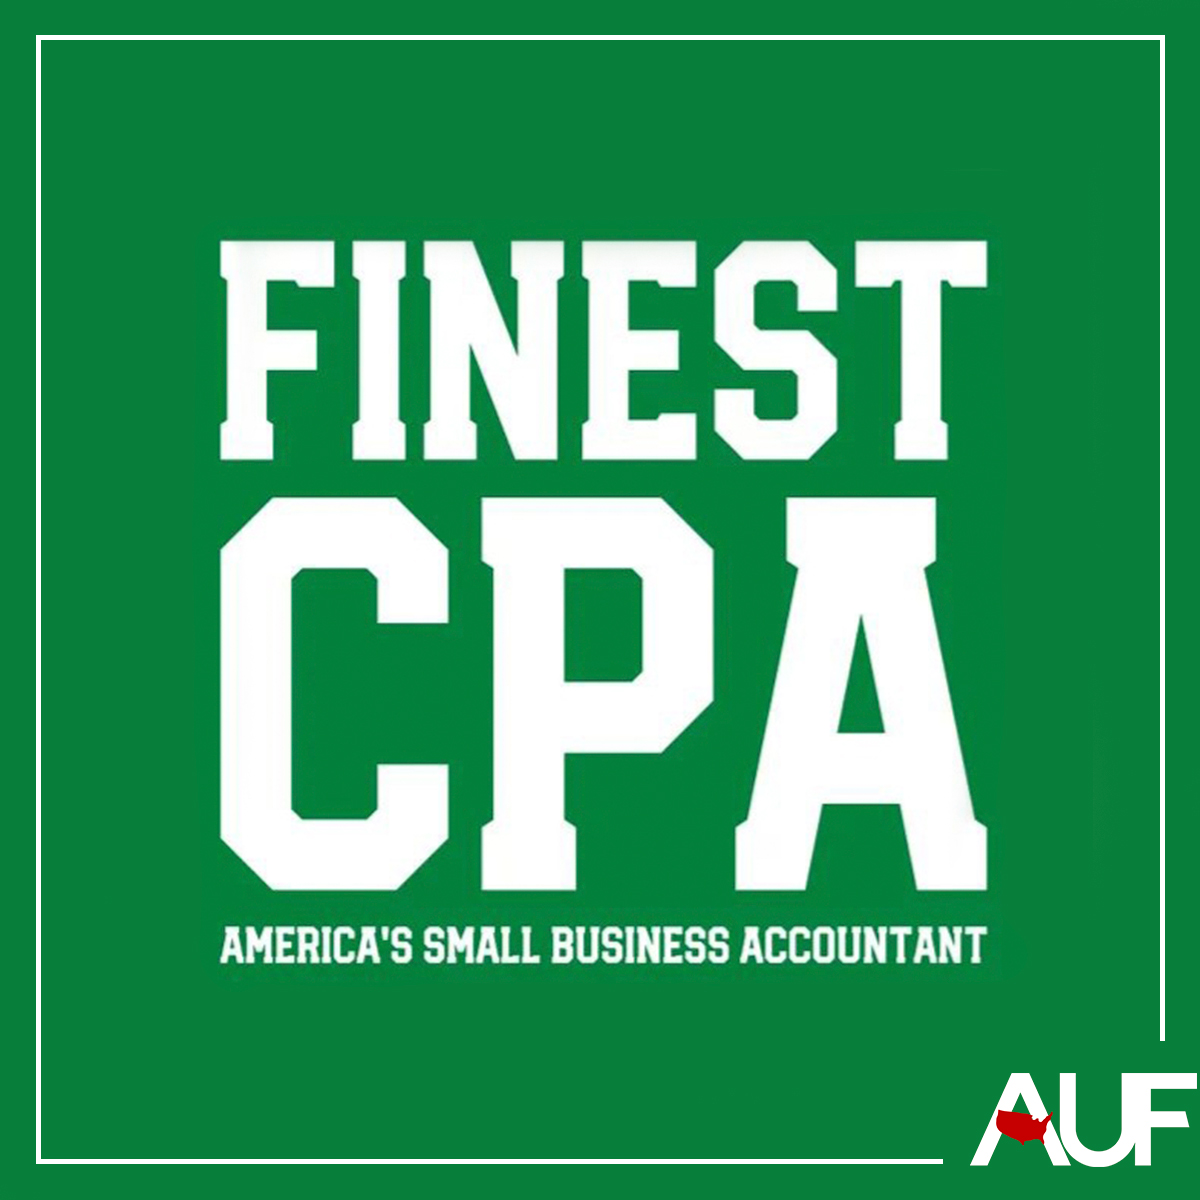 Multiple Pictures: Finest CPA